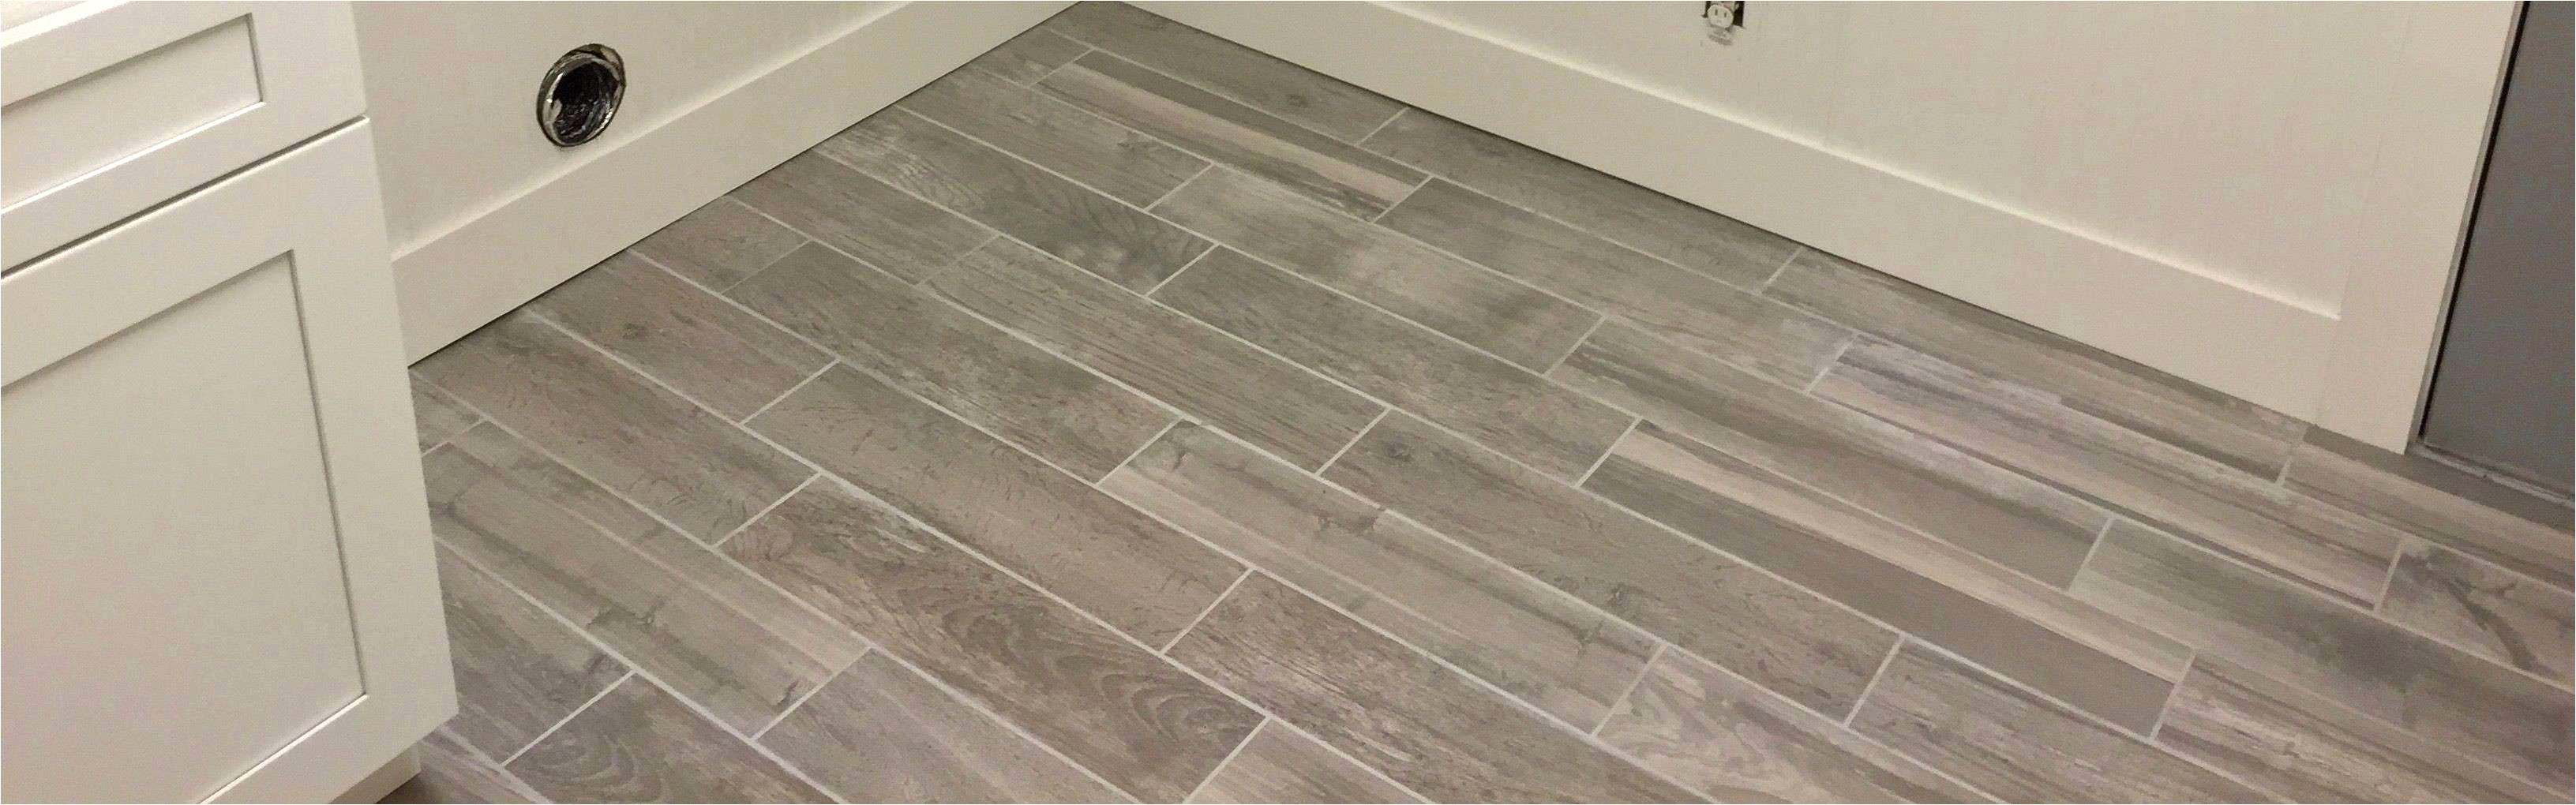 Best Polish for Tile Floors 50 Beautiful How to Polish Floor Tiles Pictures 50 Photos Home